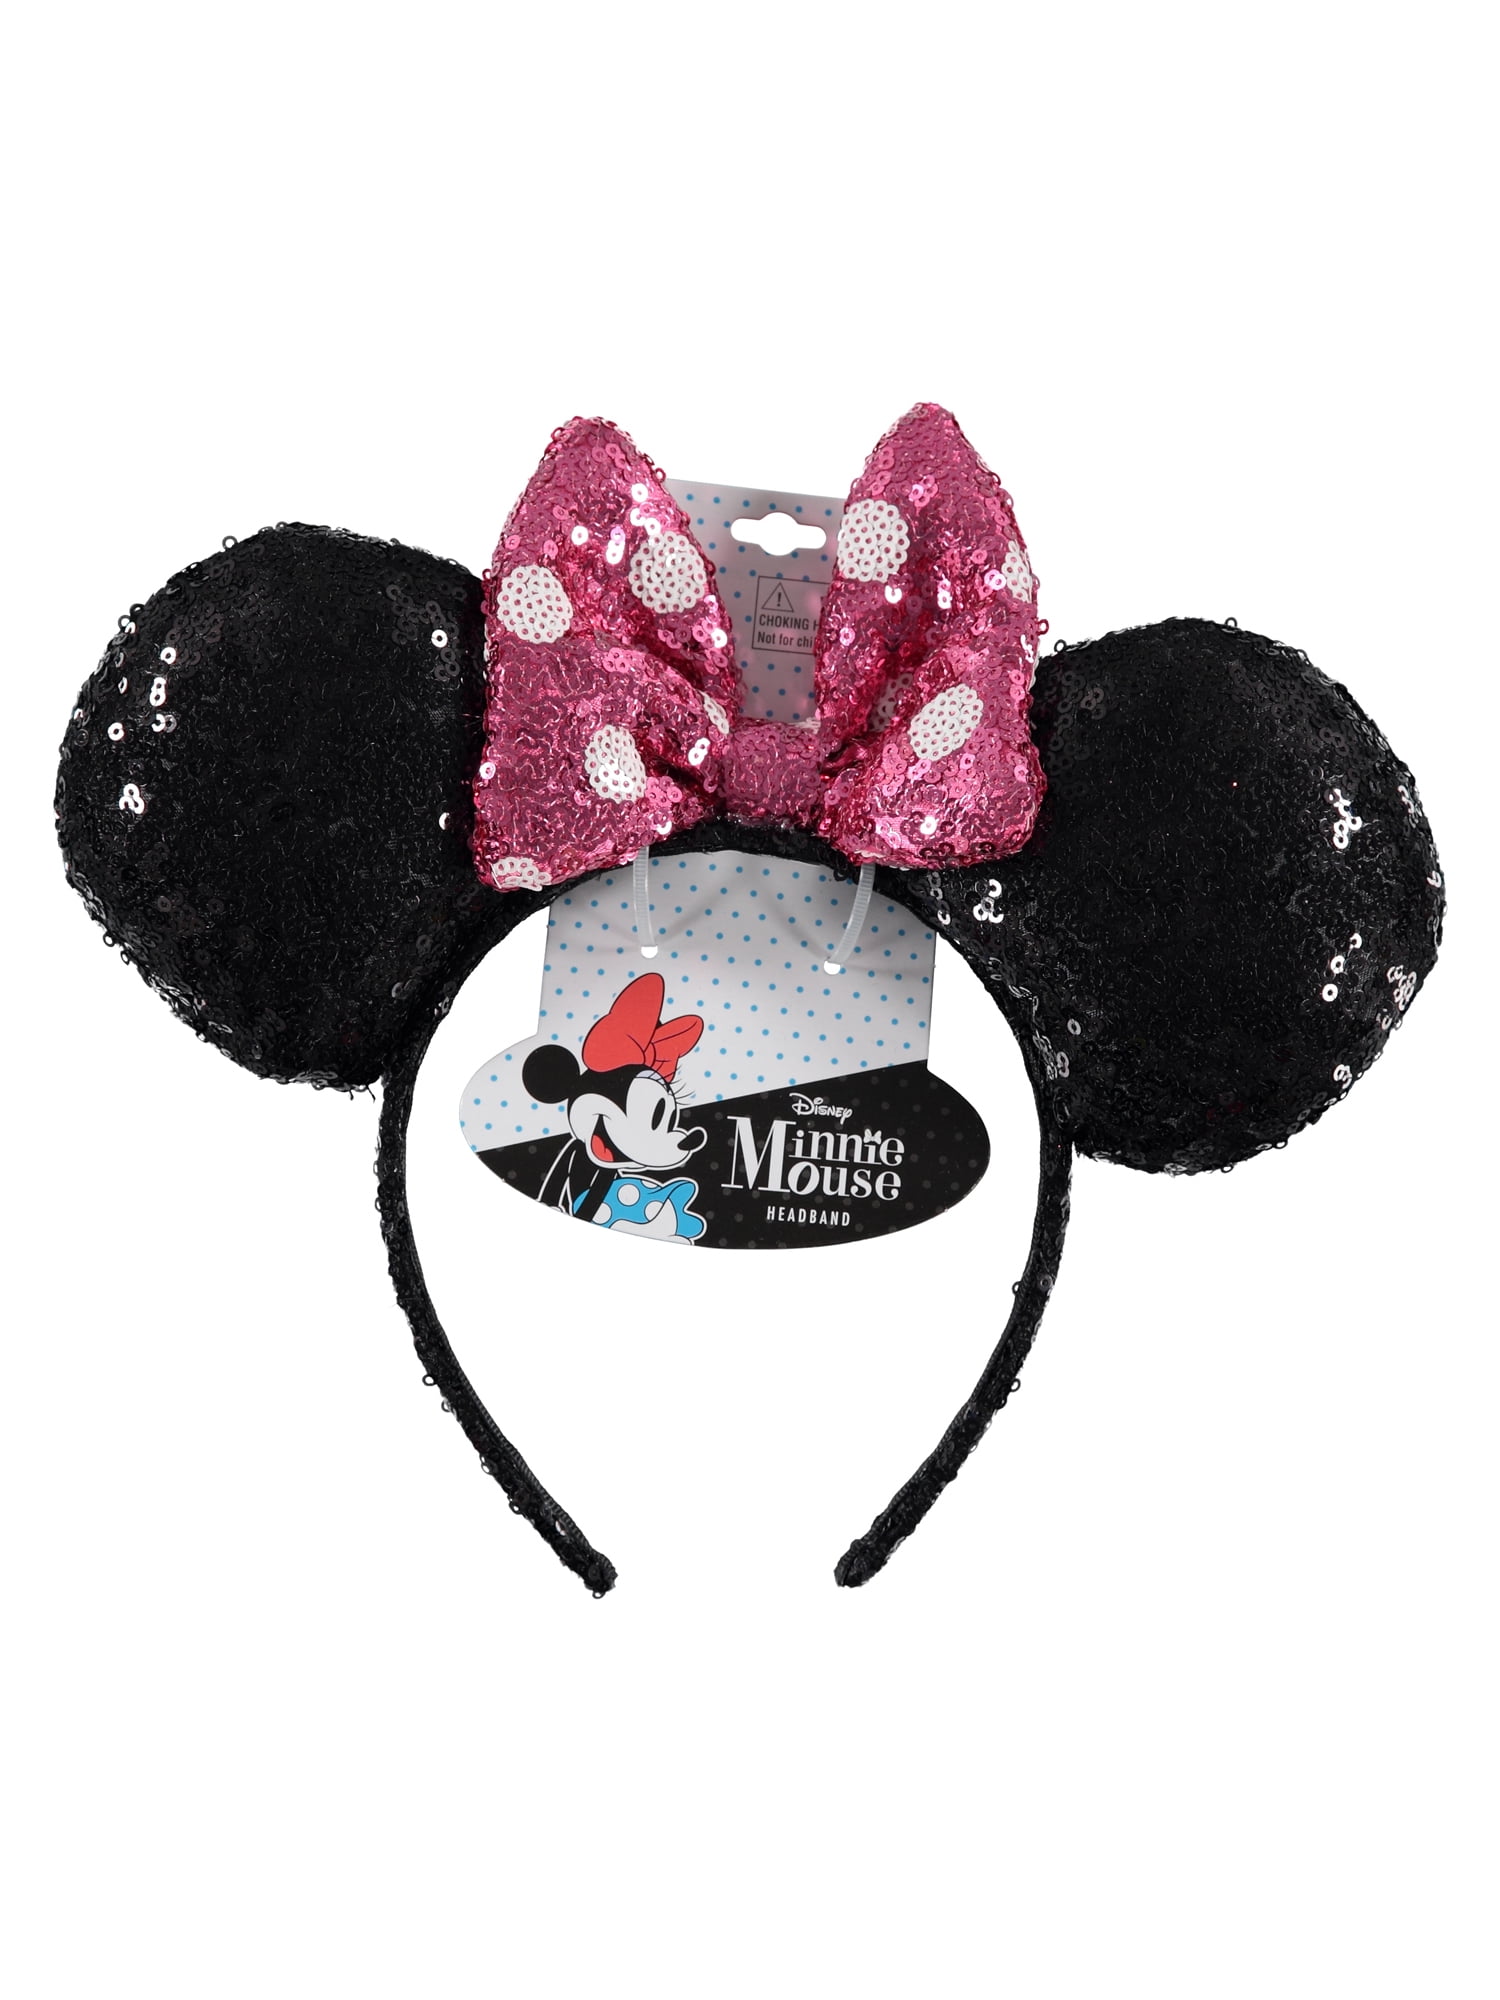 20 pcs Minnie Mickey Mouse Ears Headbands Black Pink Bow Party Favors Birthday 